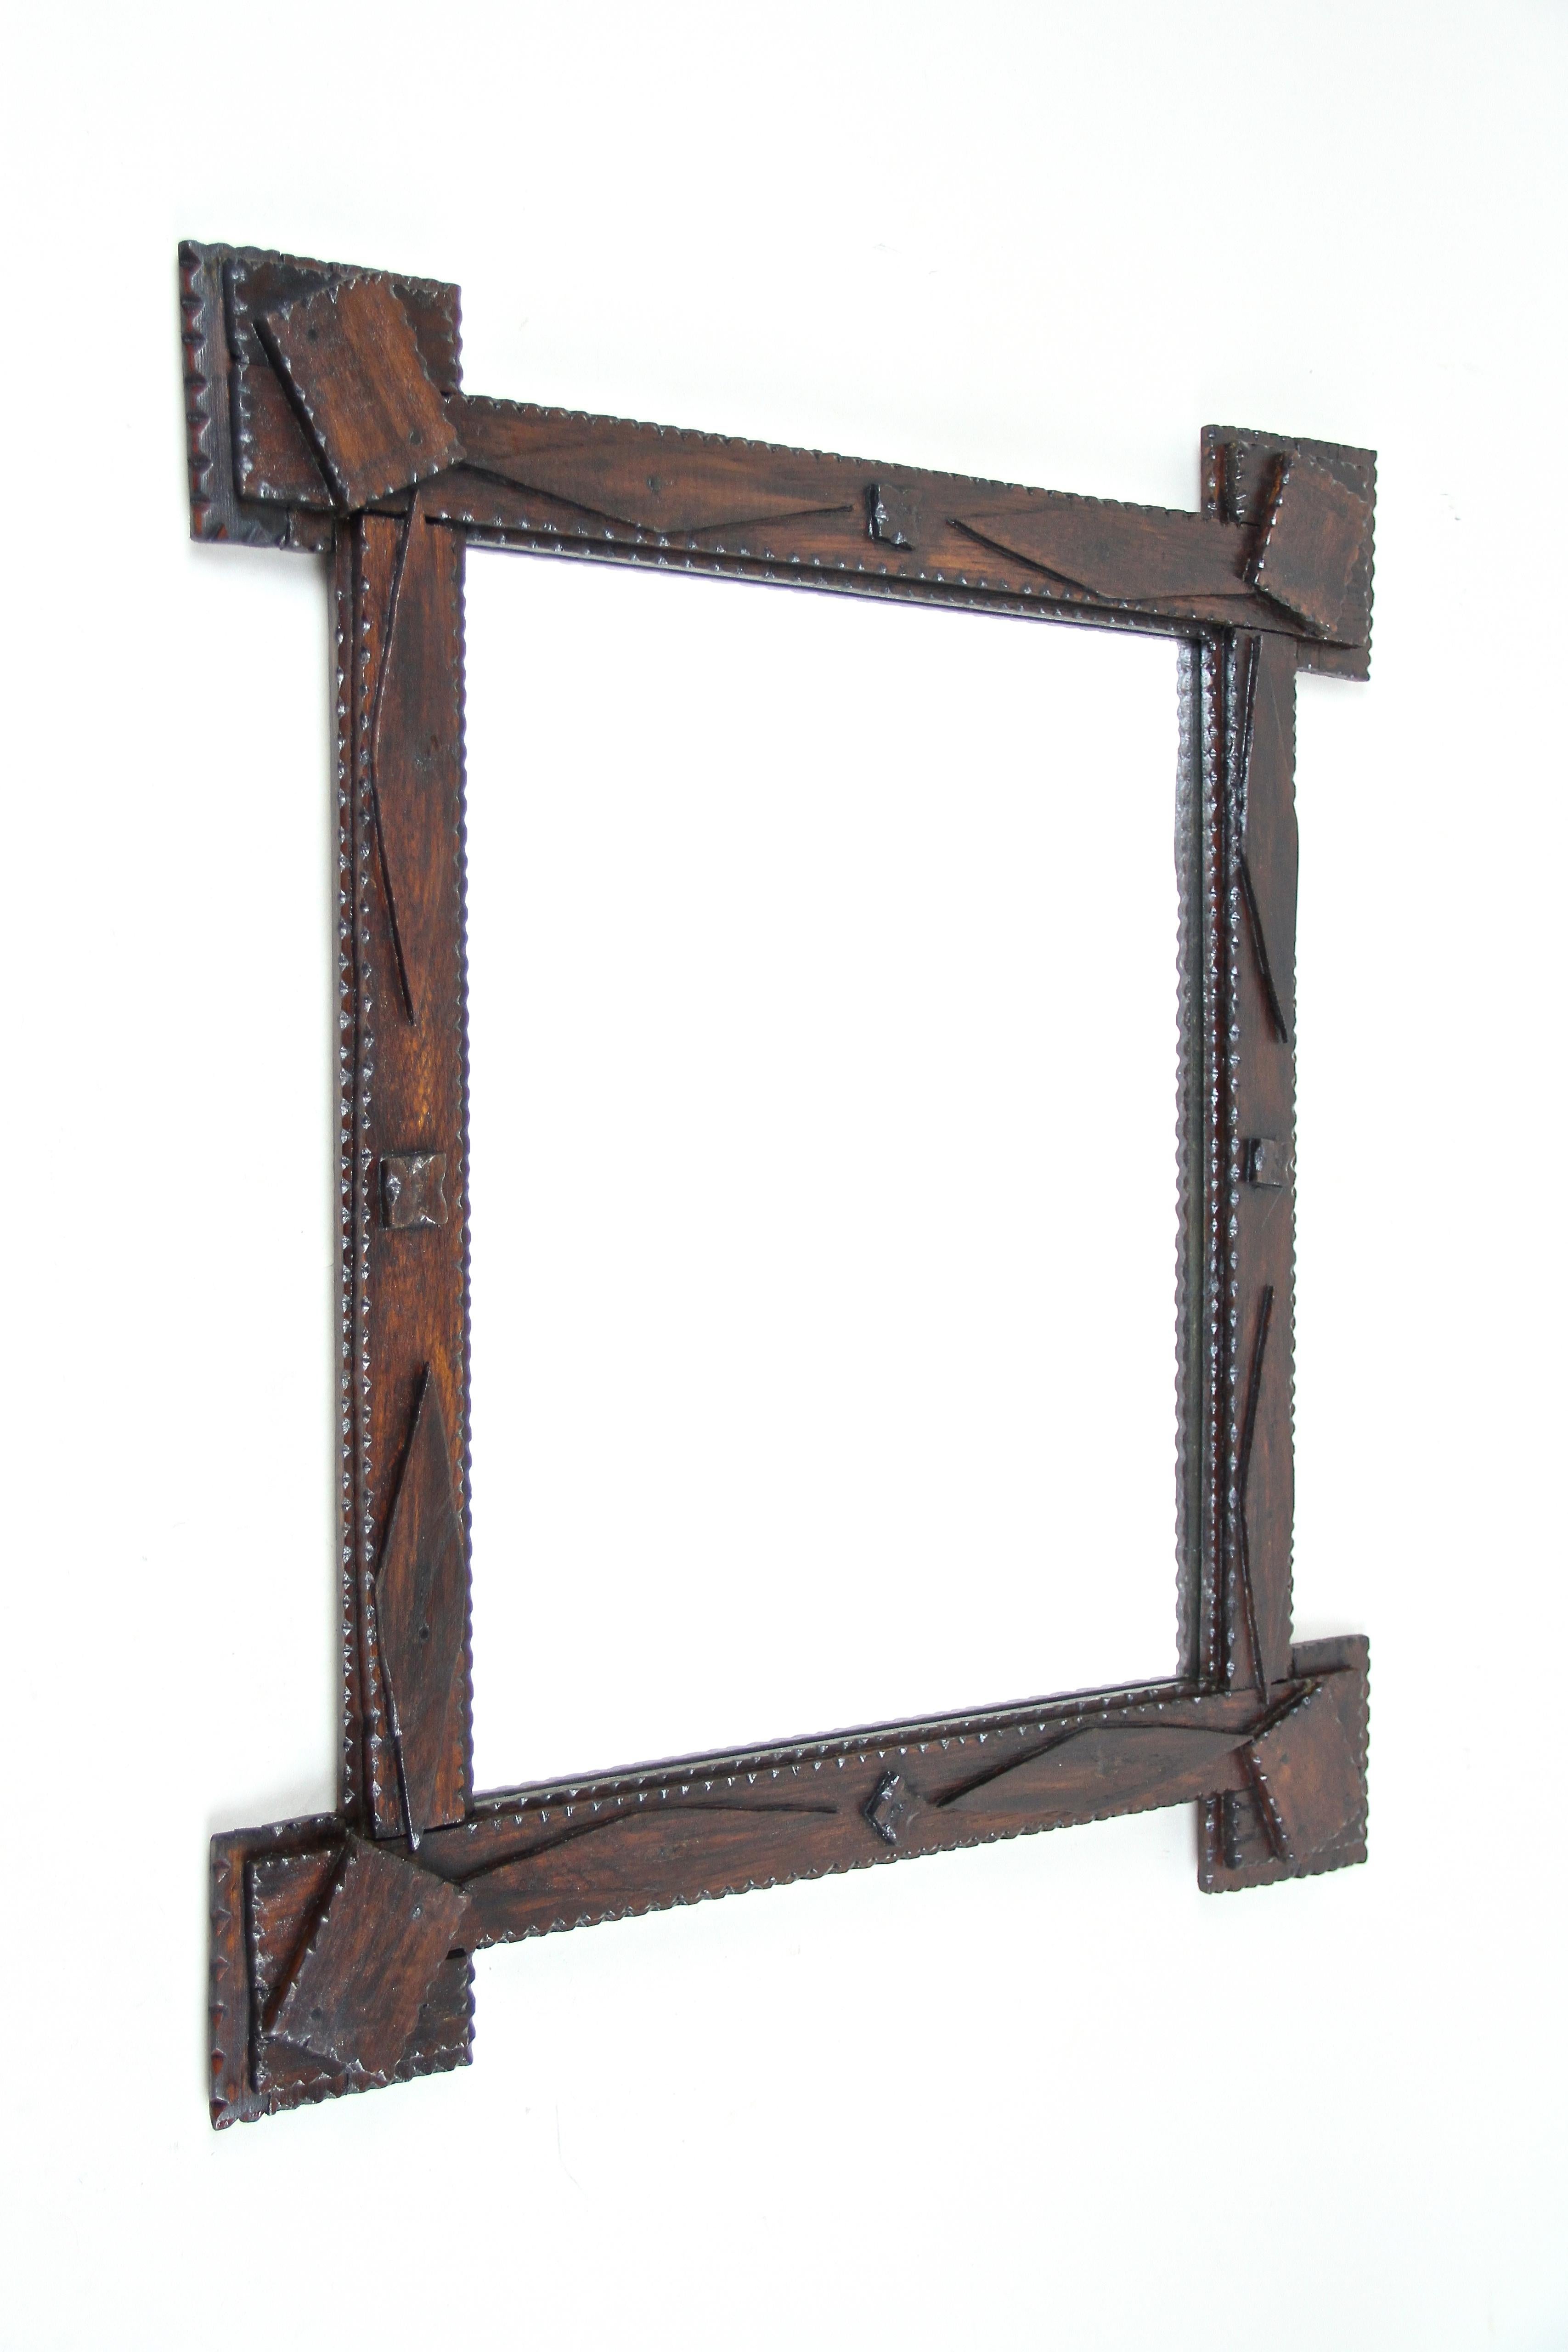 Uncommon rustic tramp art wall mirror from the late 19th century in Austria, around 1870. The beautiful shaped frame was stained in a nice dark brown and shows extended corners with a very unusual design: the last plate of this so-called 